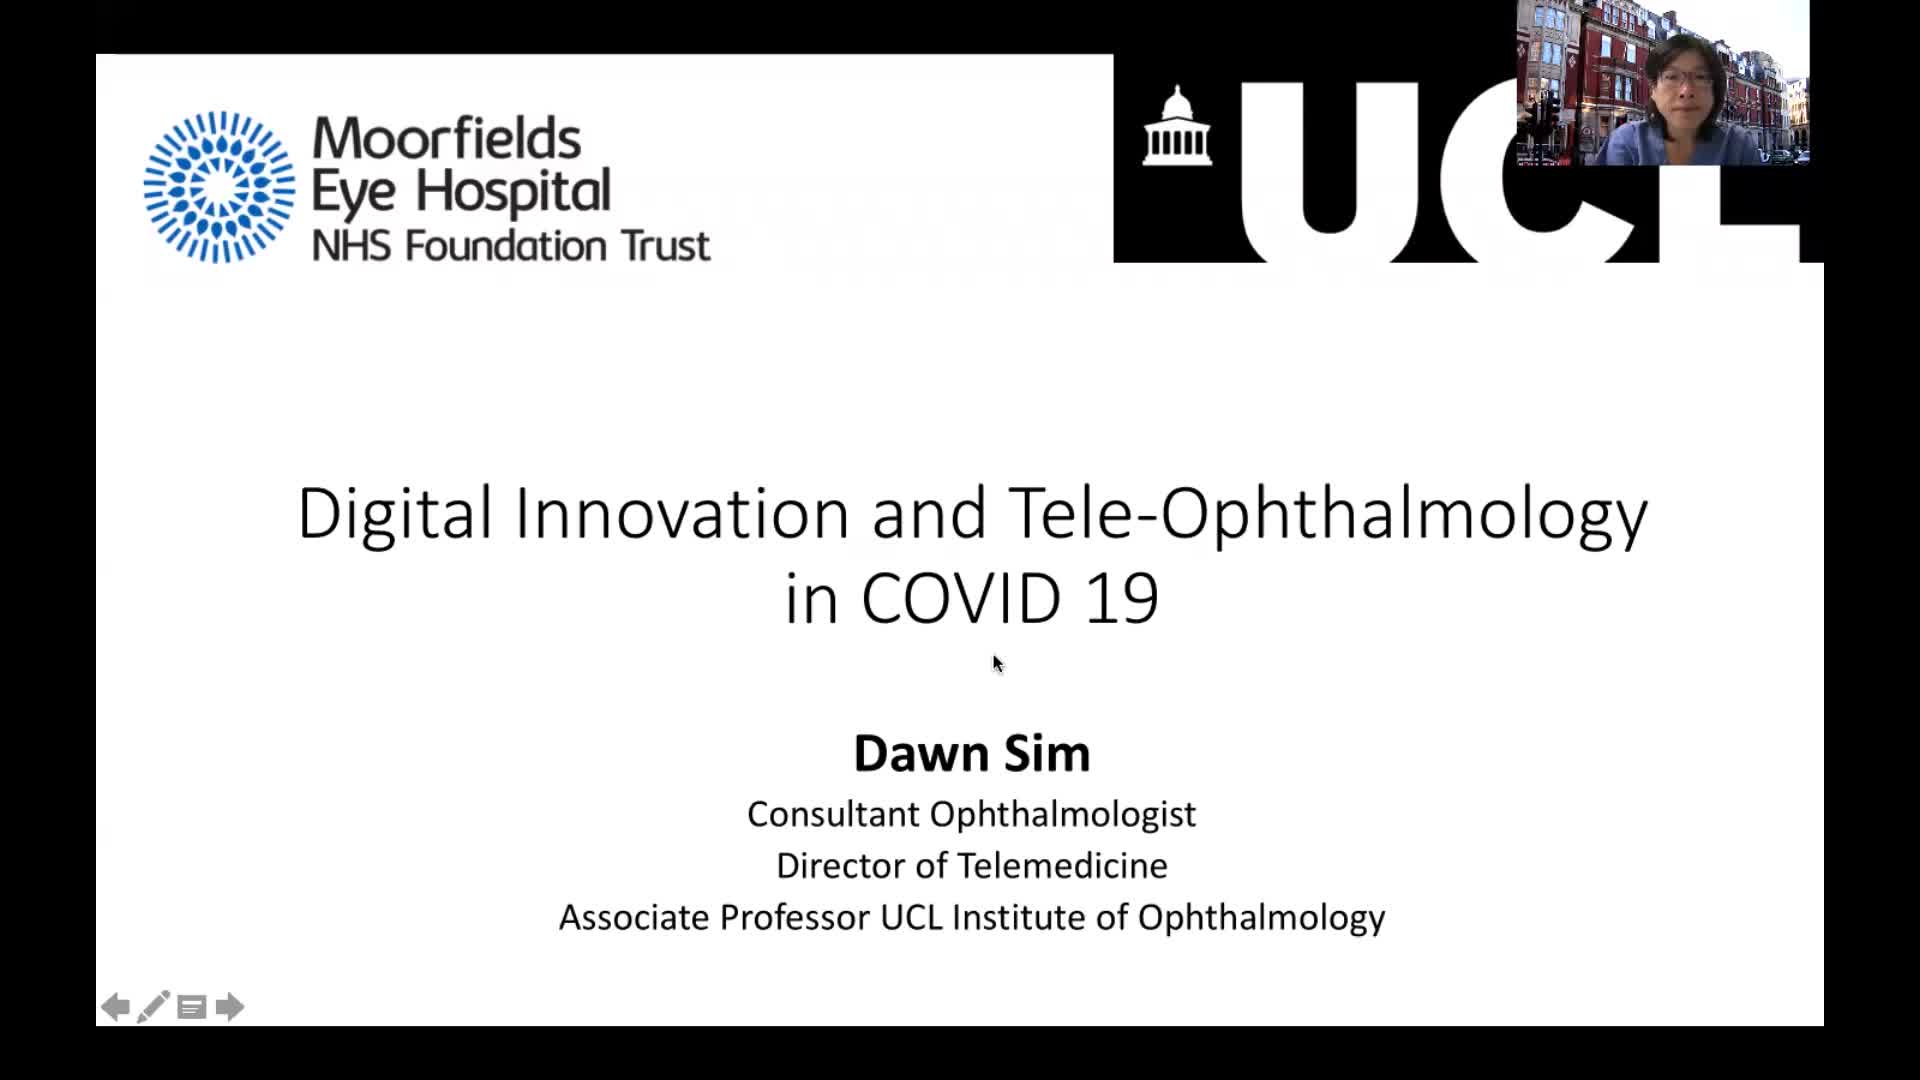 Digital Innovations and Teleophthalmology in COVID-19